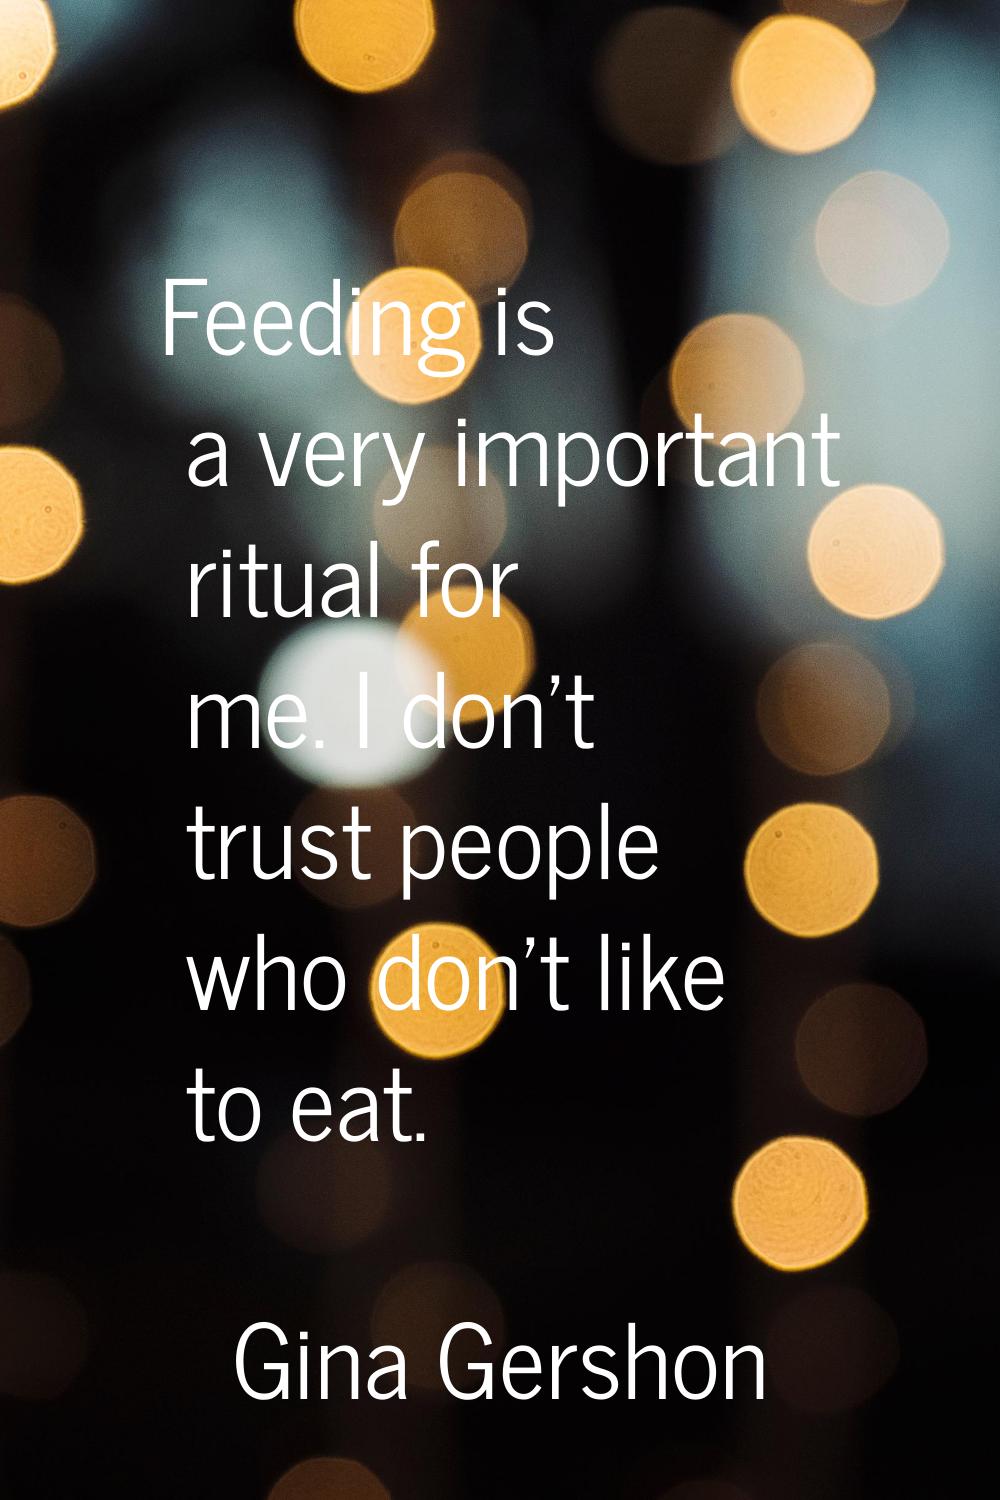 Feeding is a very important ritual for me. I don't trust people who don't like to eat.